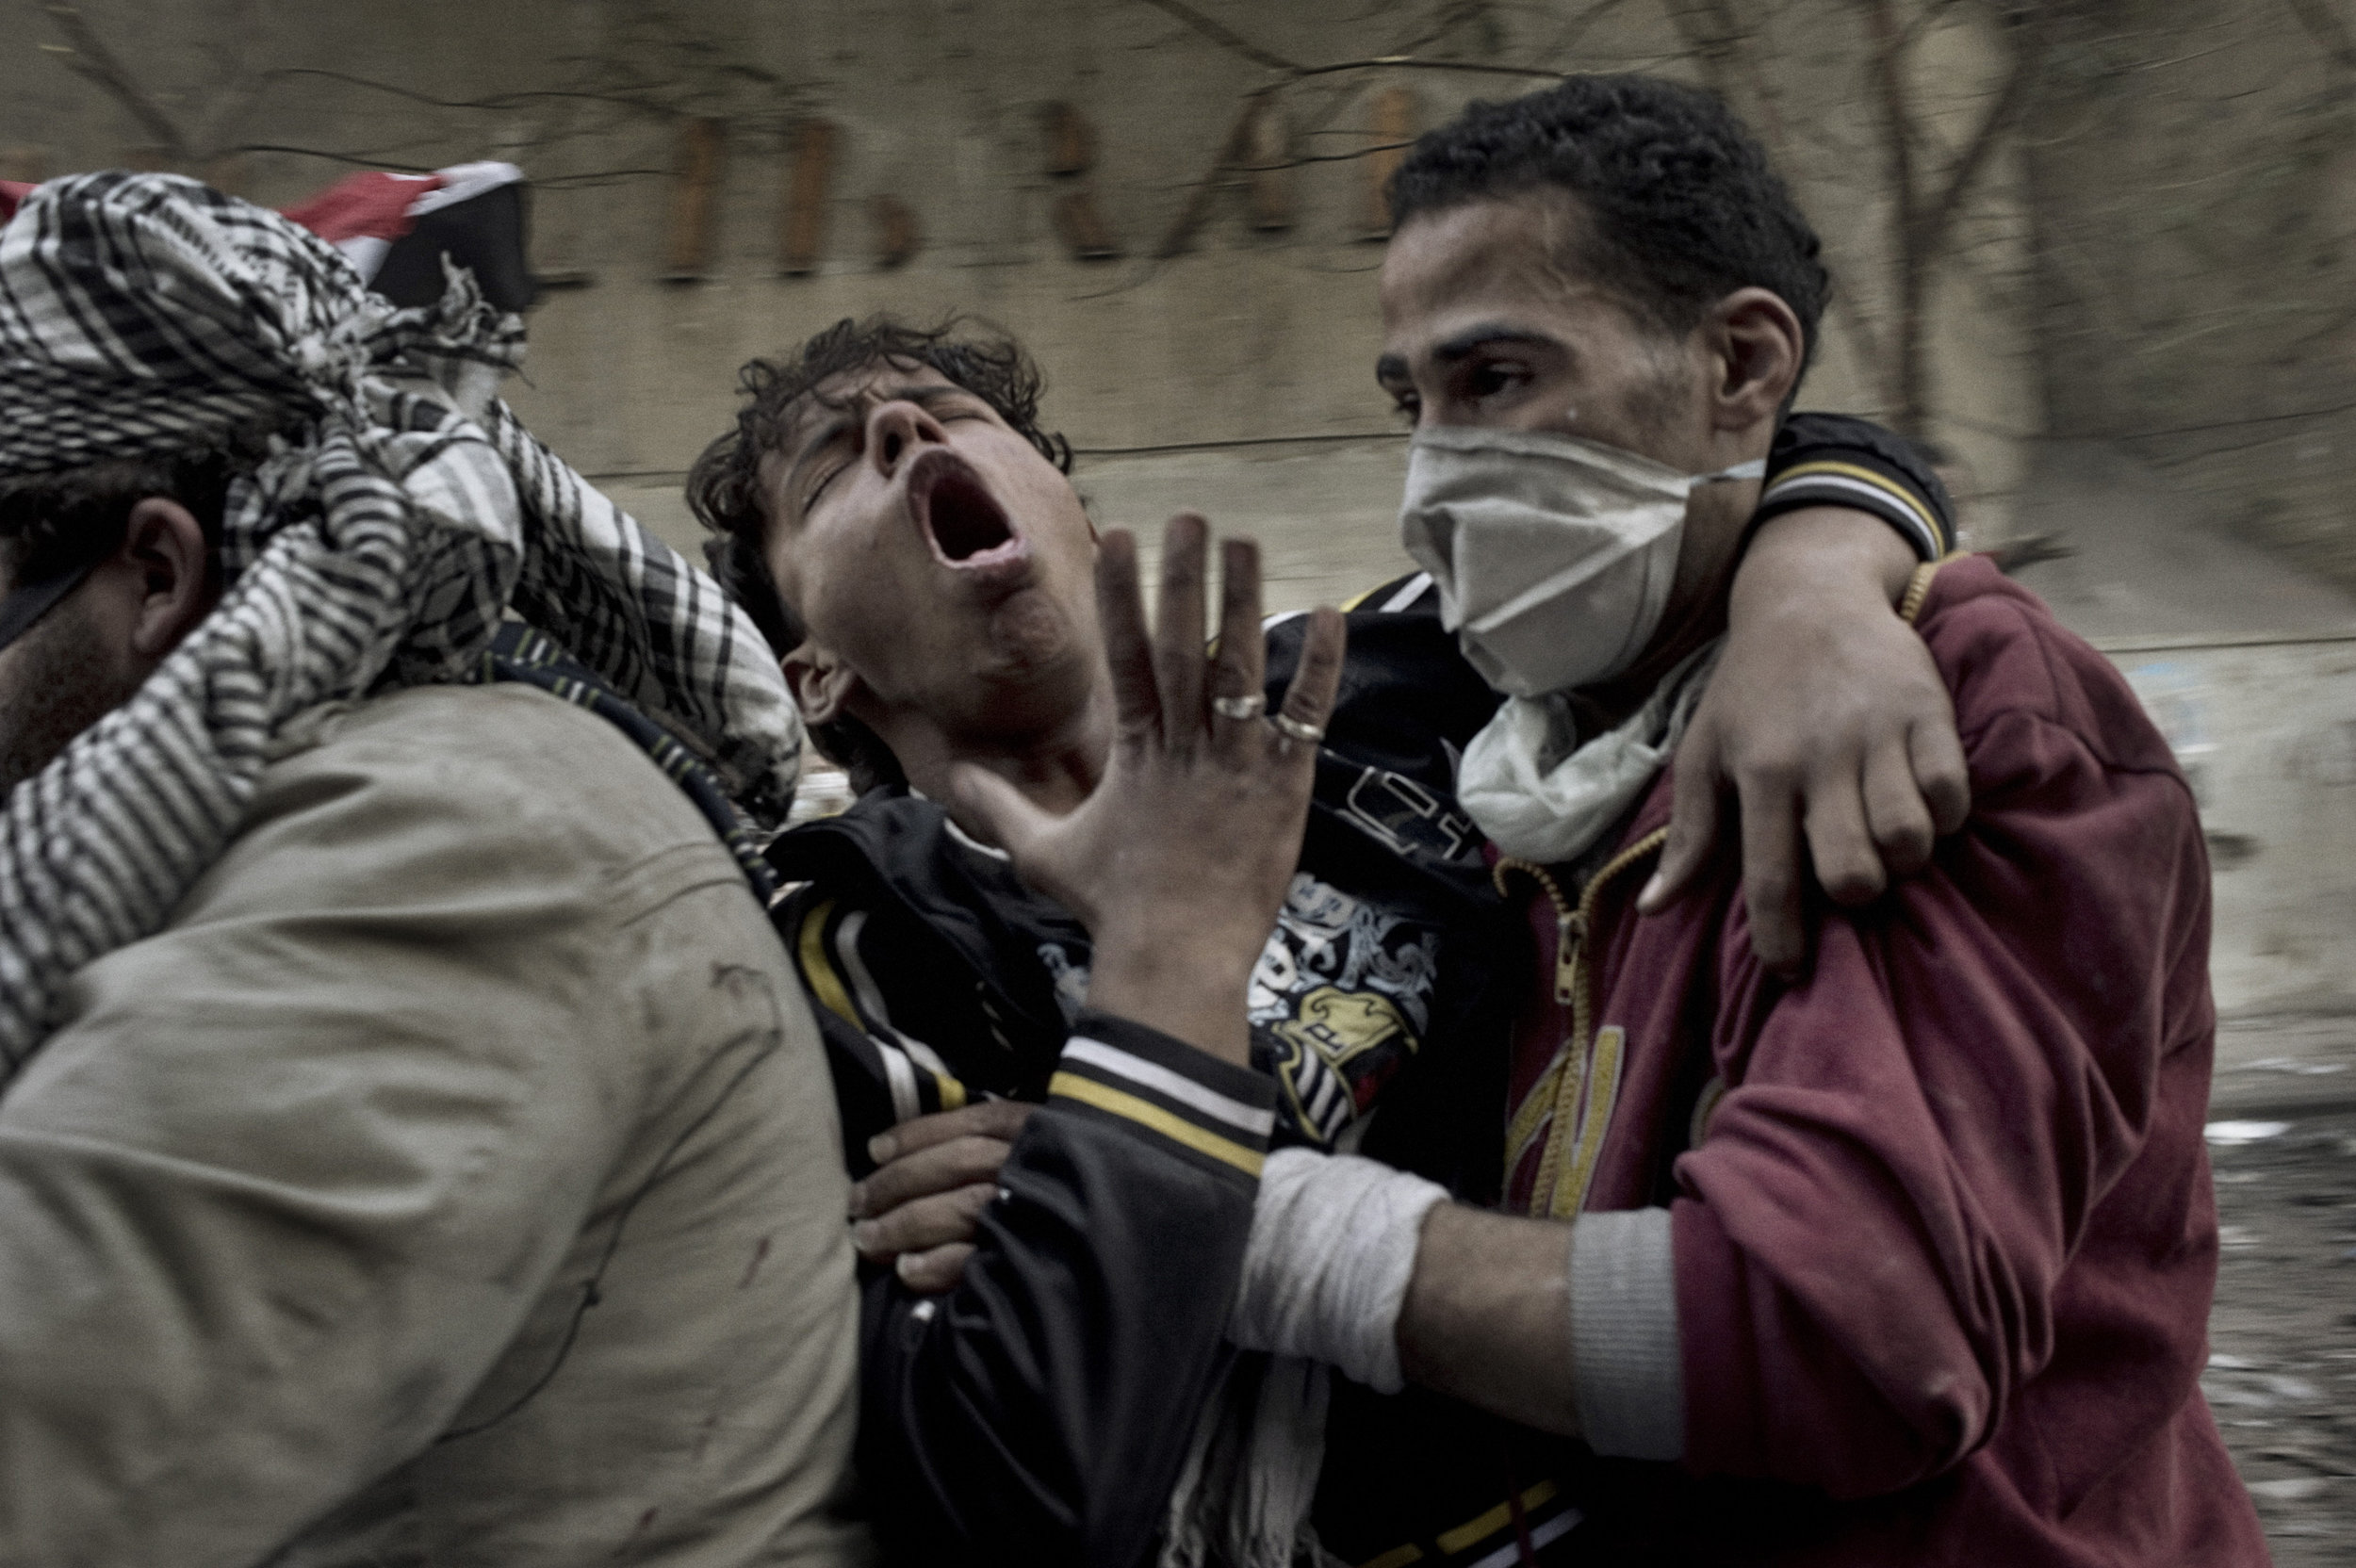   Cairo  Egypt  November 23, 2011: A protester overcome by tear gas is evacuated from Mohamed Mahmoud street, November 23, 2011.
 